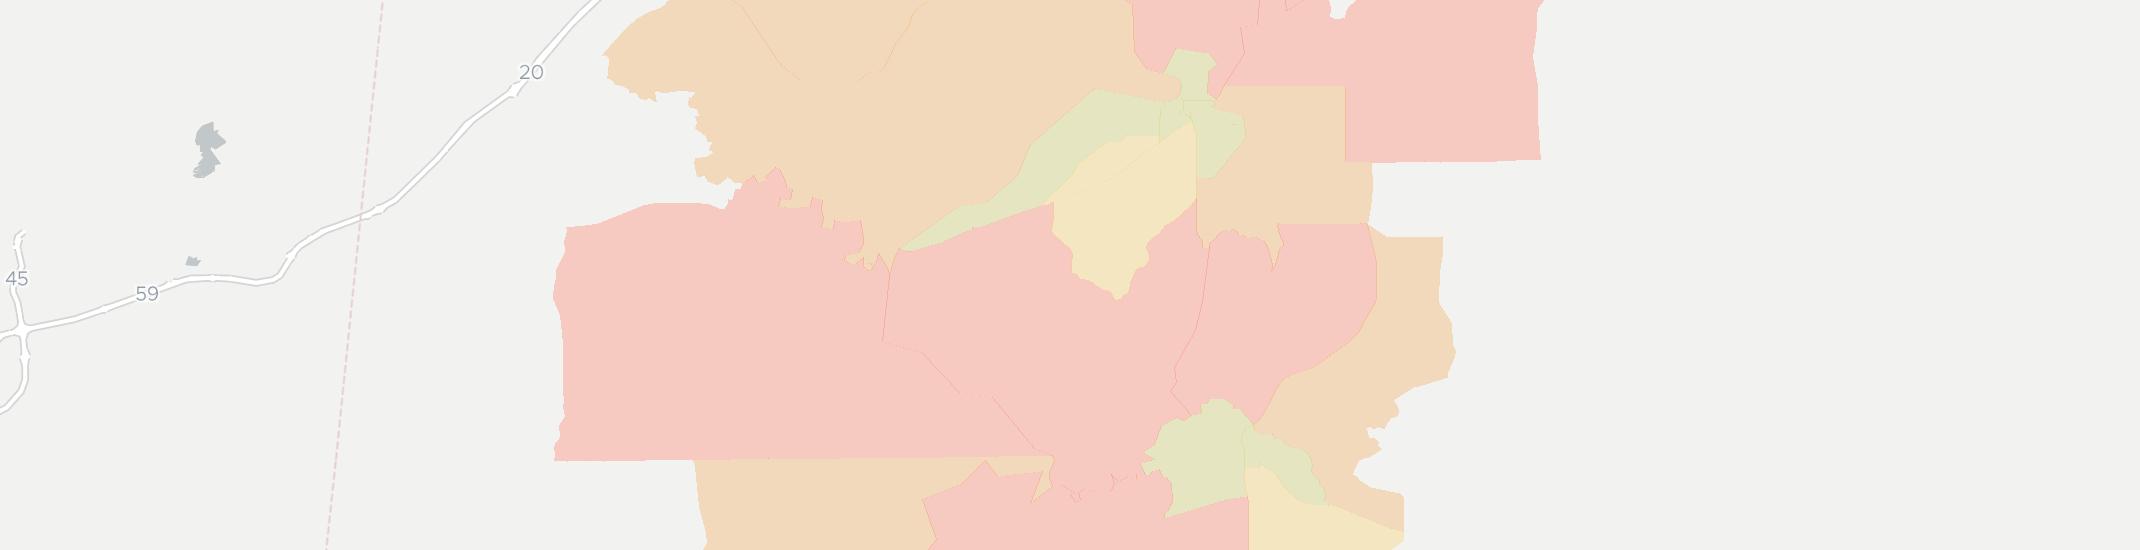 Demopolis Internet Competition Map. Click for interactive map.